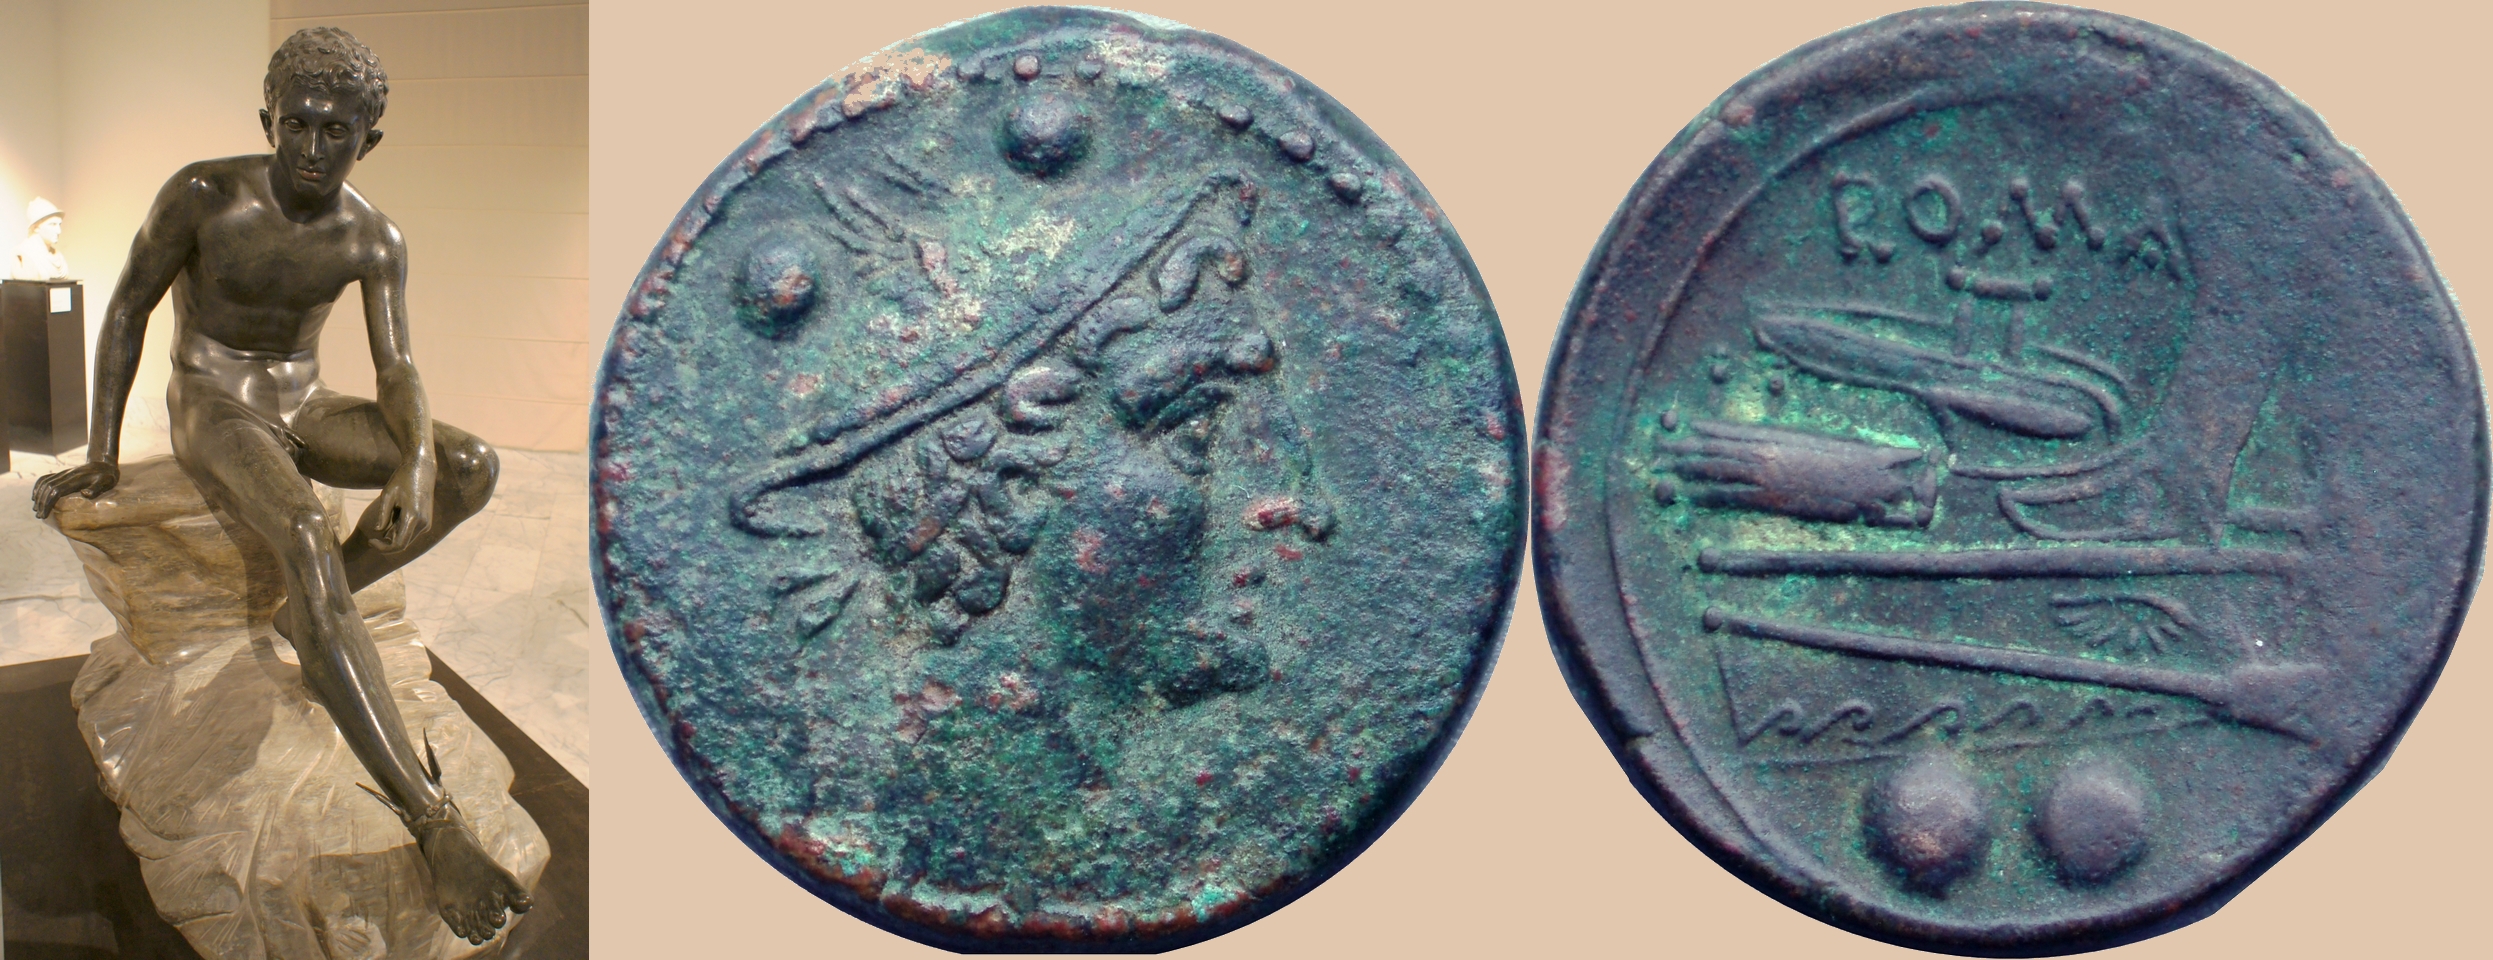 B3 97/6a coin of Luceria with Mercury and prow, alongside statue of the Greek God Hermes or Roman Mercury resting